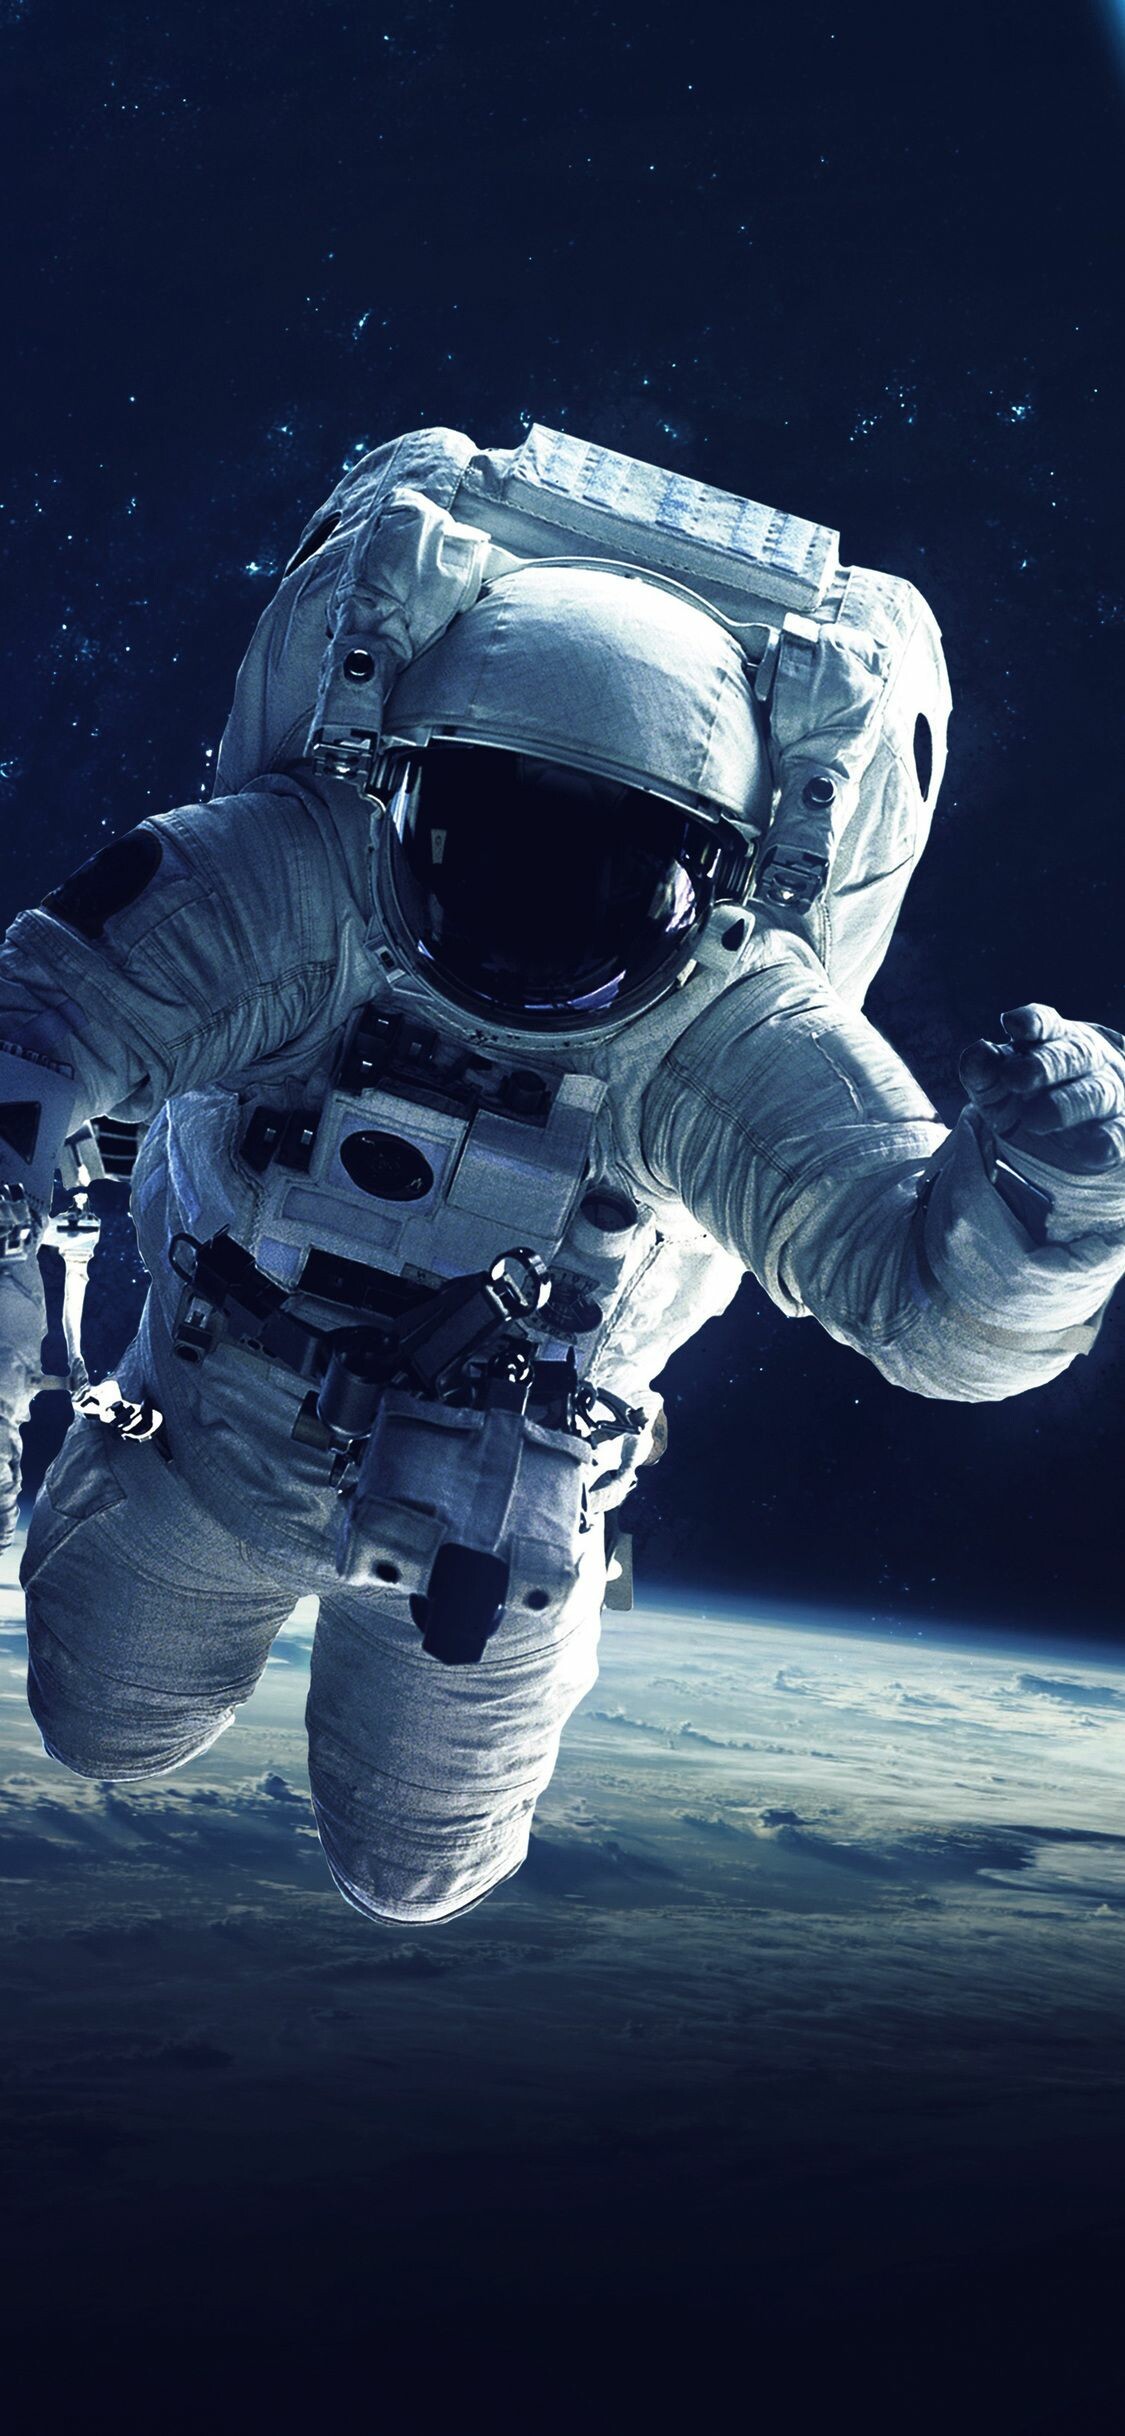 Astronaut: A person deployed by a human spaceflight program to serve aboard a spacecraft. 1130x2440 HD Background.